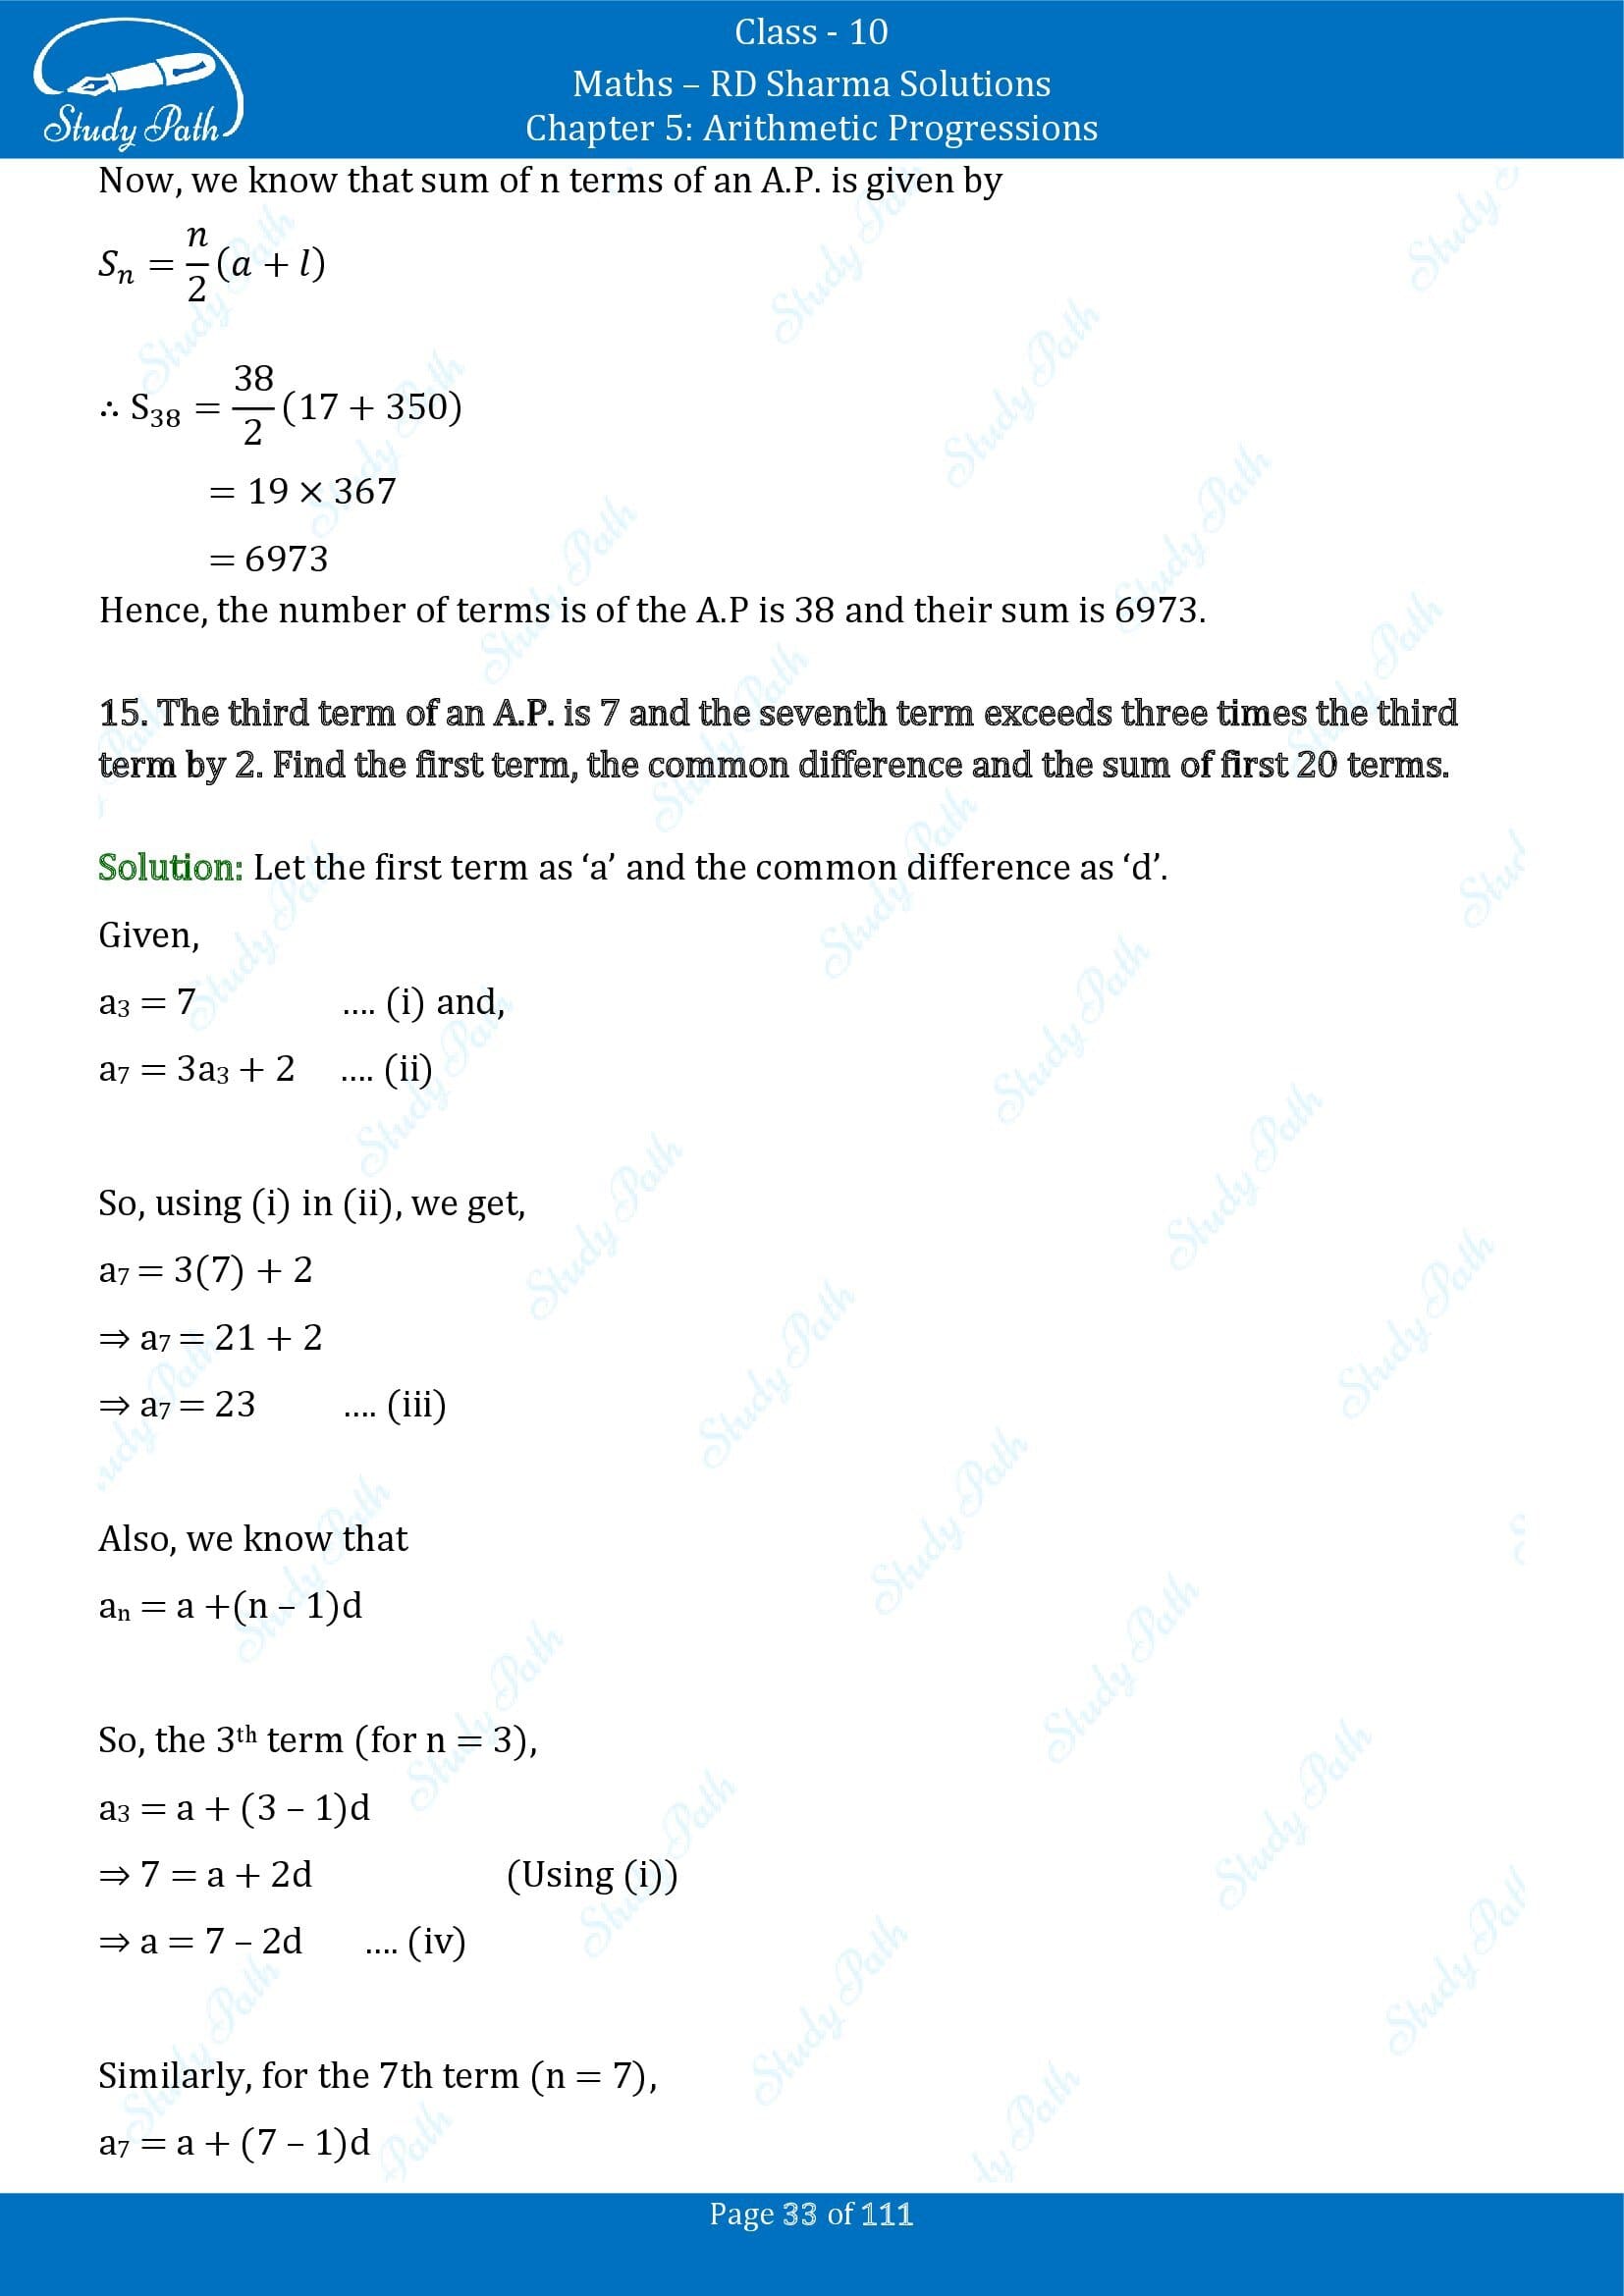 RD Sharma Solutions Class 10 Chapter 5 Arithmetic Progressions Exercise 5.6 00033